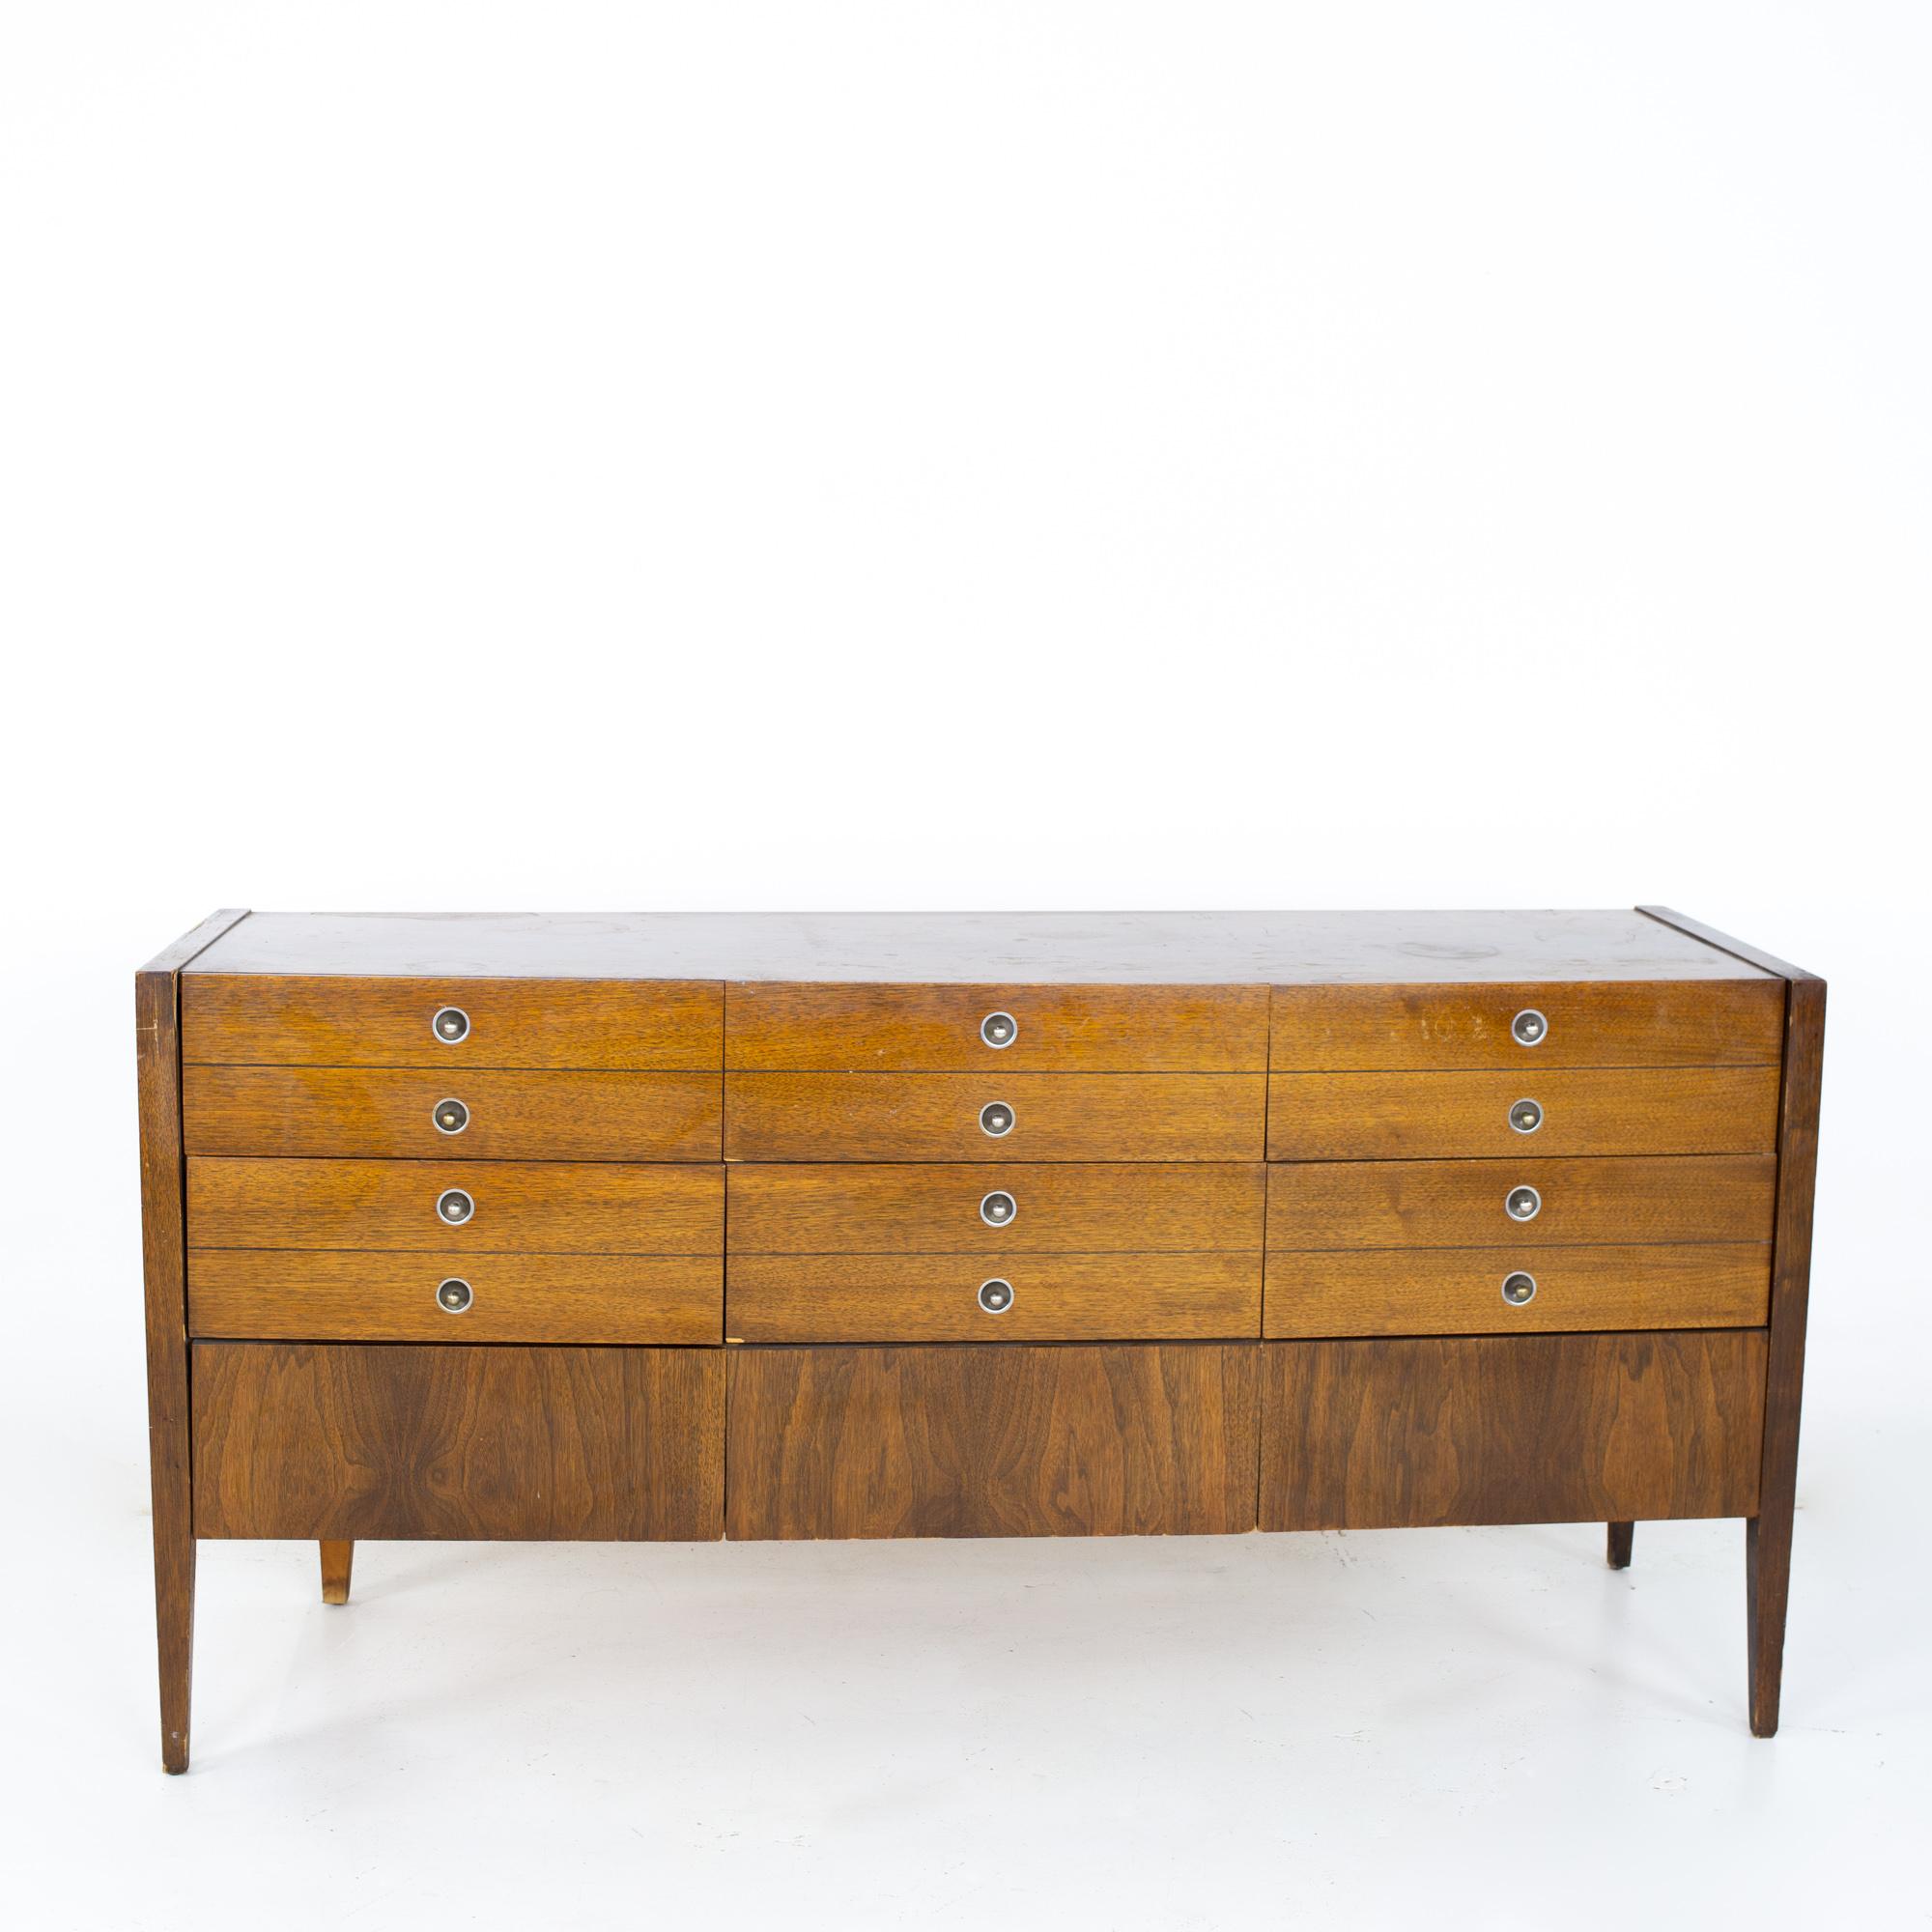 Bassett trimline mid century walnut 9 drawer lowboy dresser
Dresser measures: 60 wide x 19 deep x 30.75 inches high

All pieces of furniture can be had in what we call restored vintage condition. That means the piece is restored upon purchase so